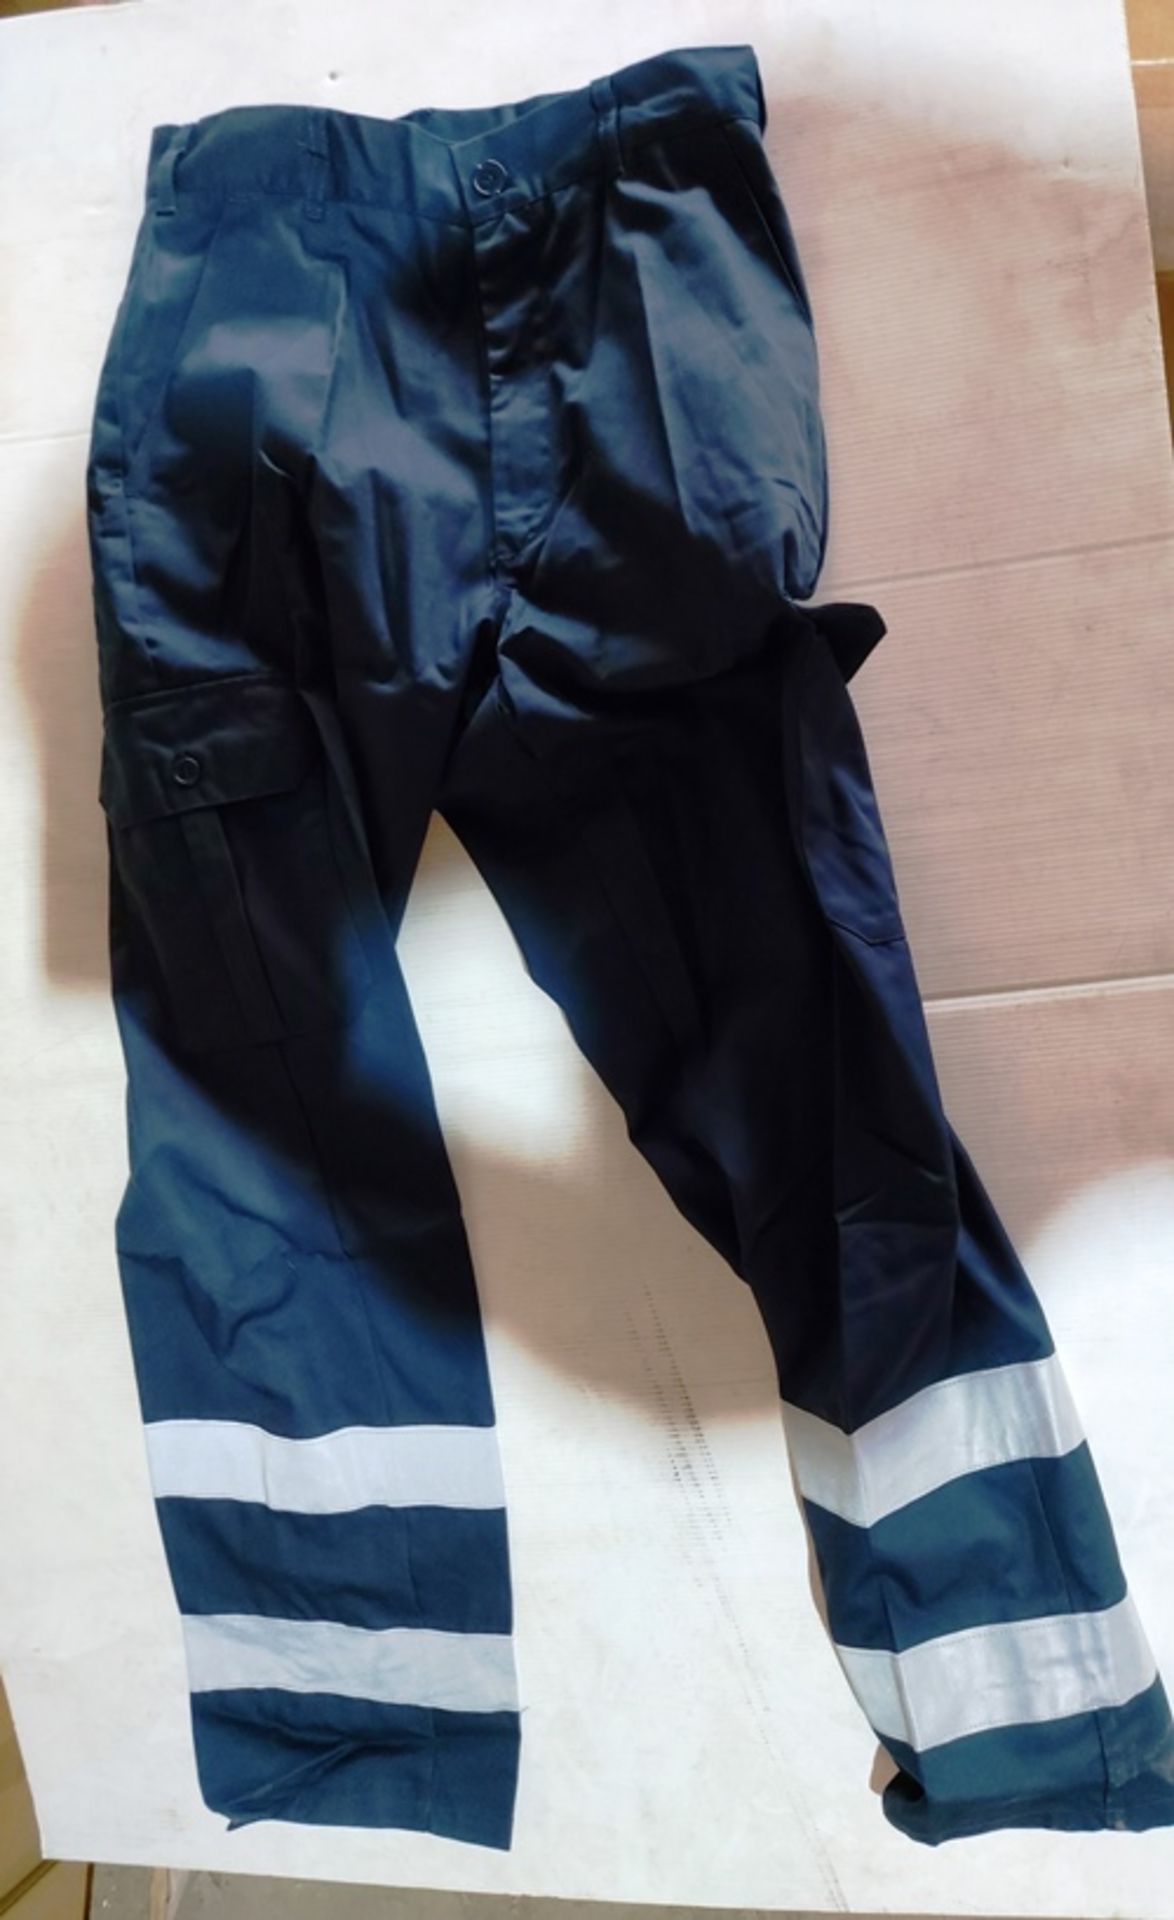 10 x Navy combat trousers workwear trousers size 30 regular new in original packaging - Image 2 of 2